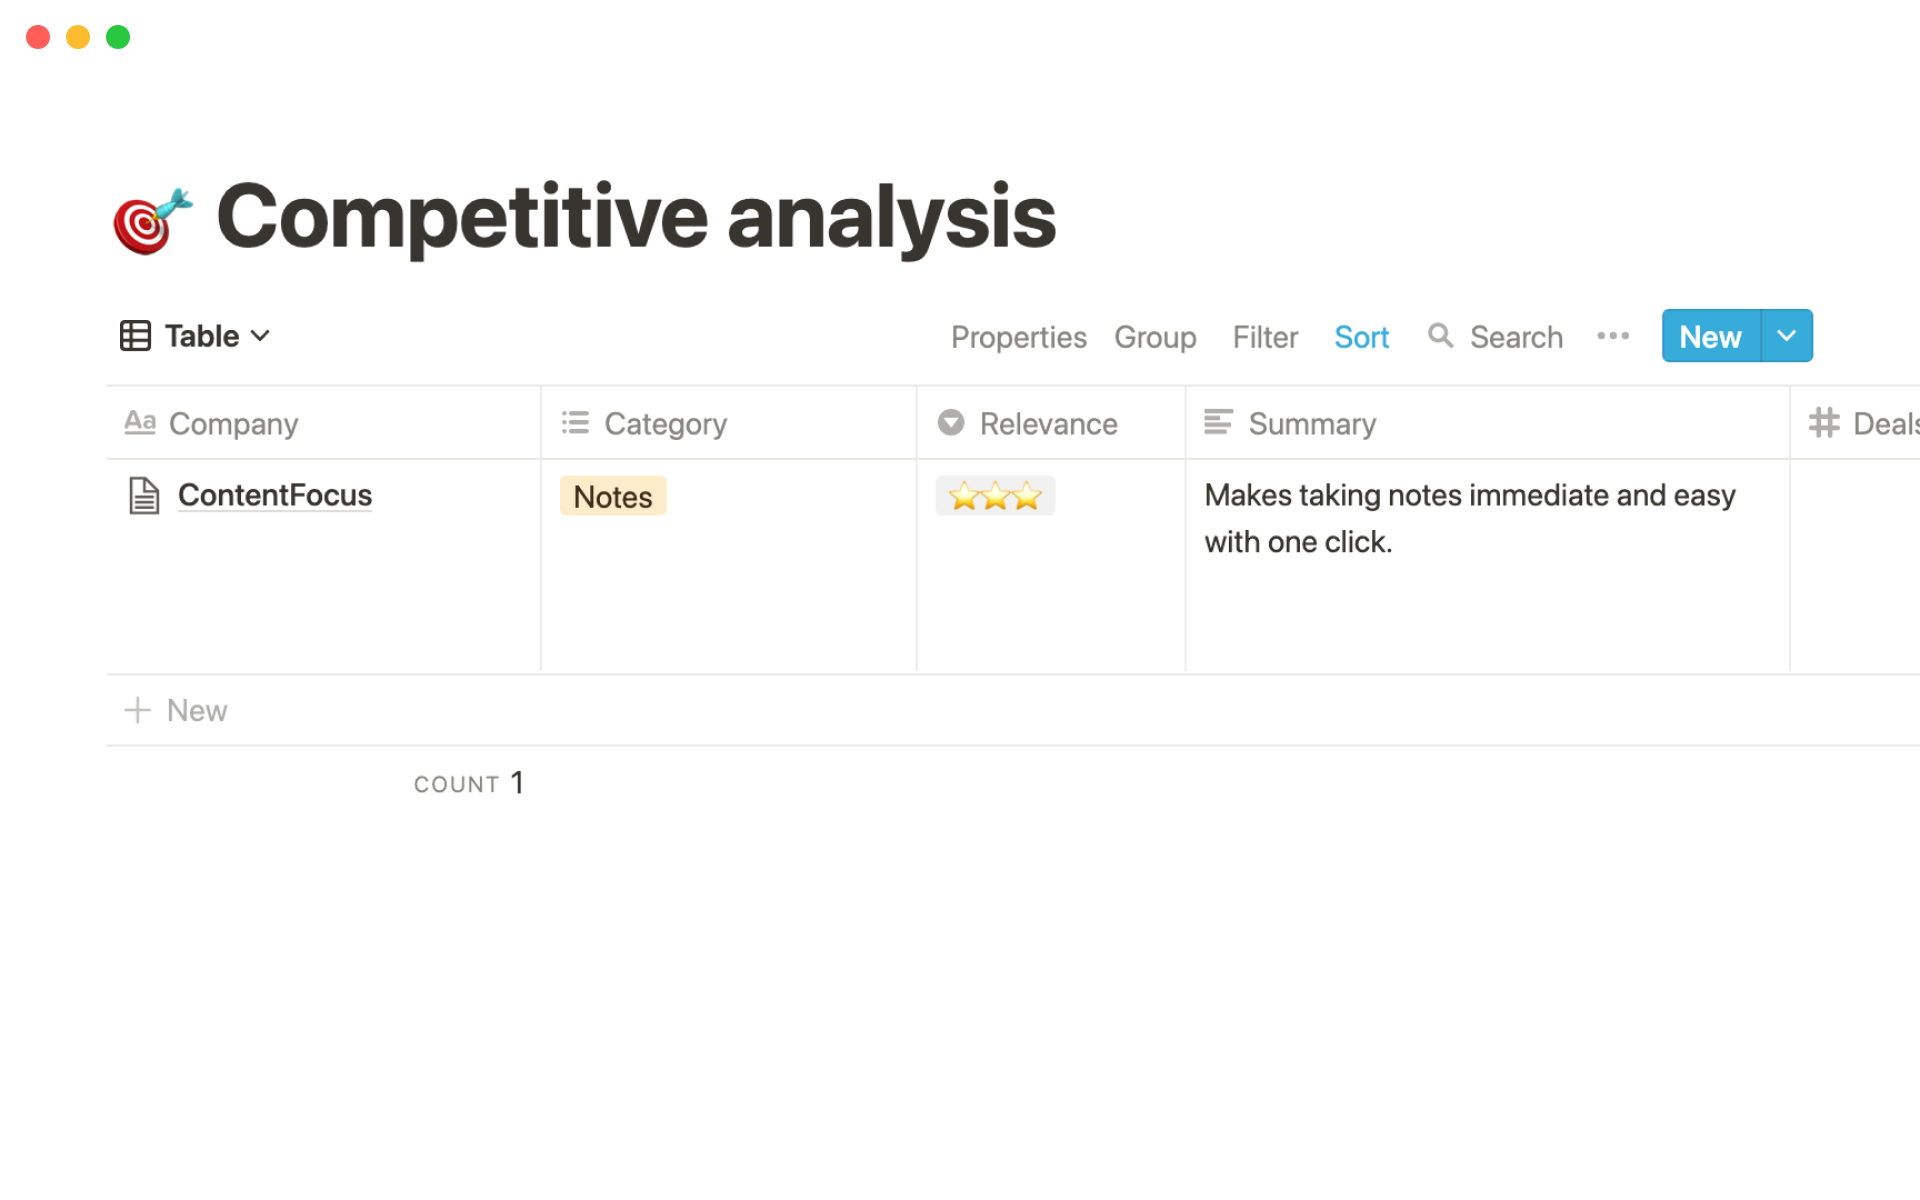 The desktop image for the Competitive analysis template